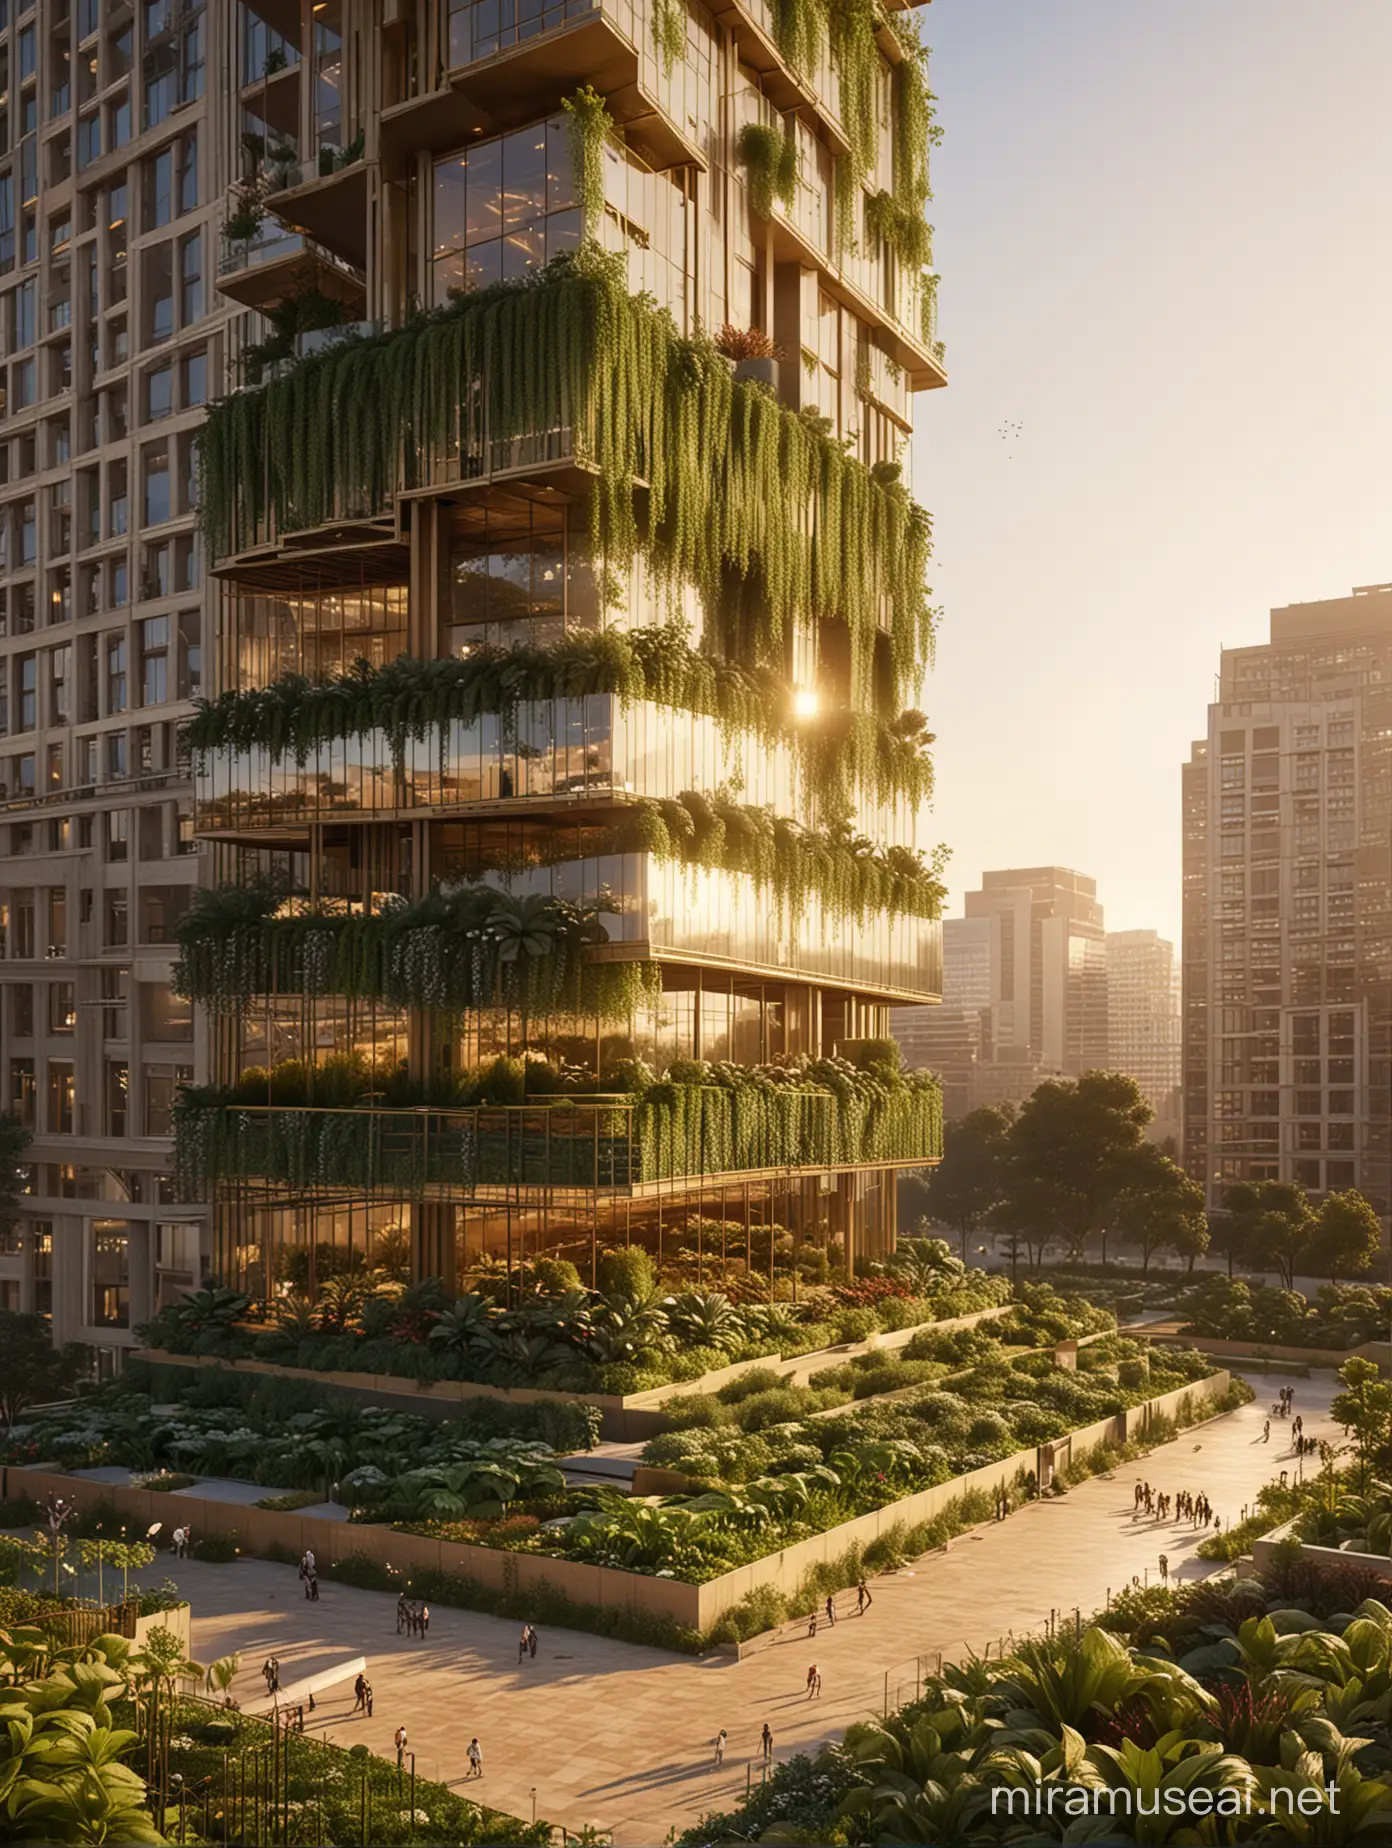 skyscraper with a plaza cut from the base, building raised above the ground with open space underneath, hanging gardens, stepped construction, good renders, golden hour, architectural, close up view of the base